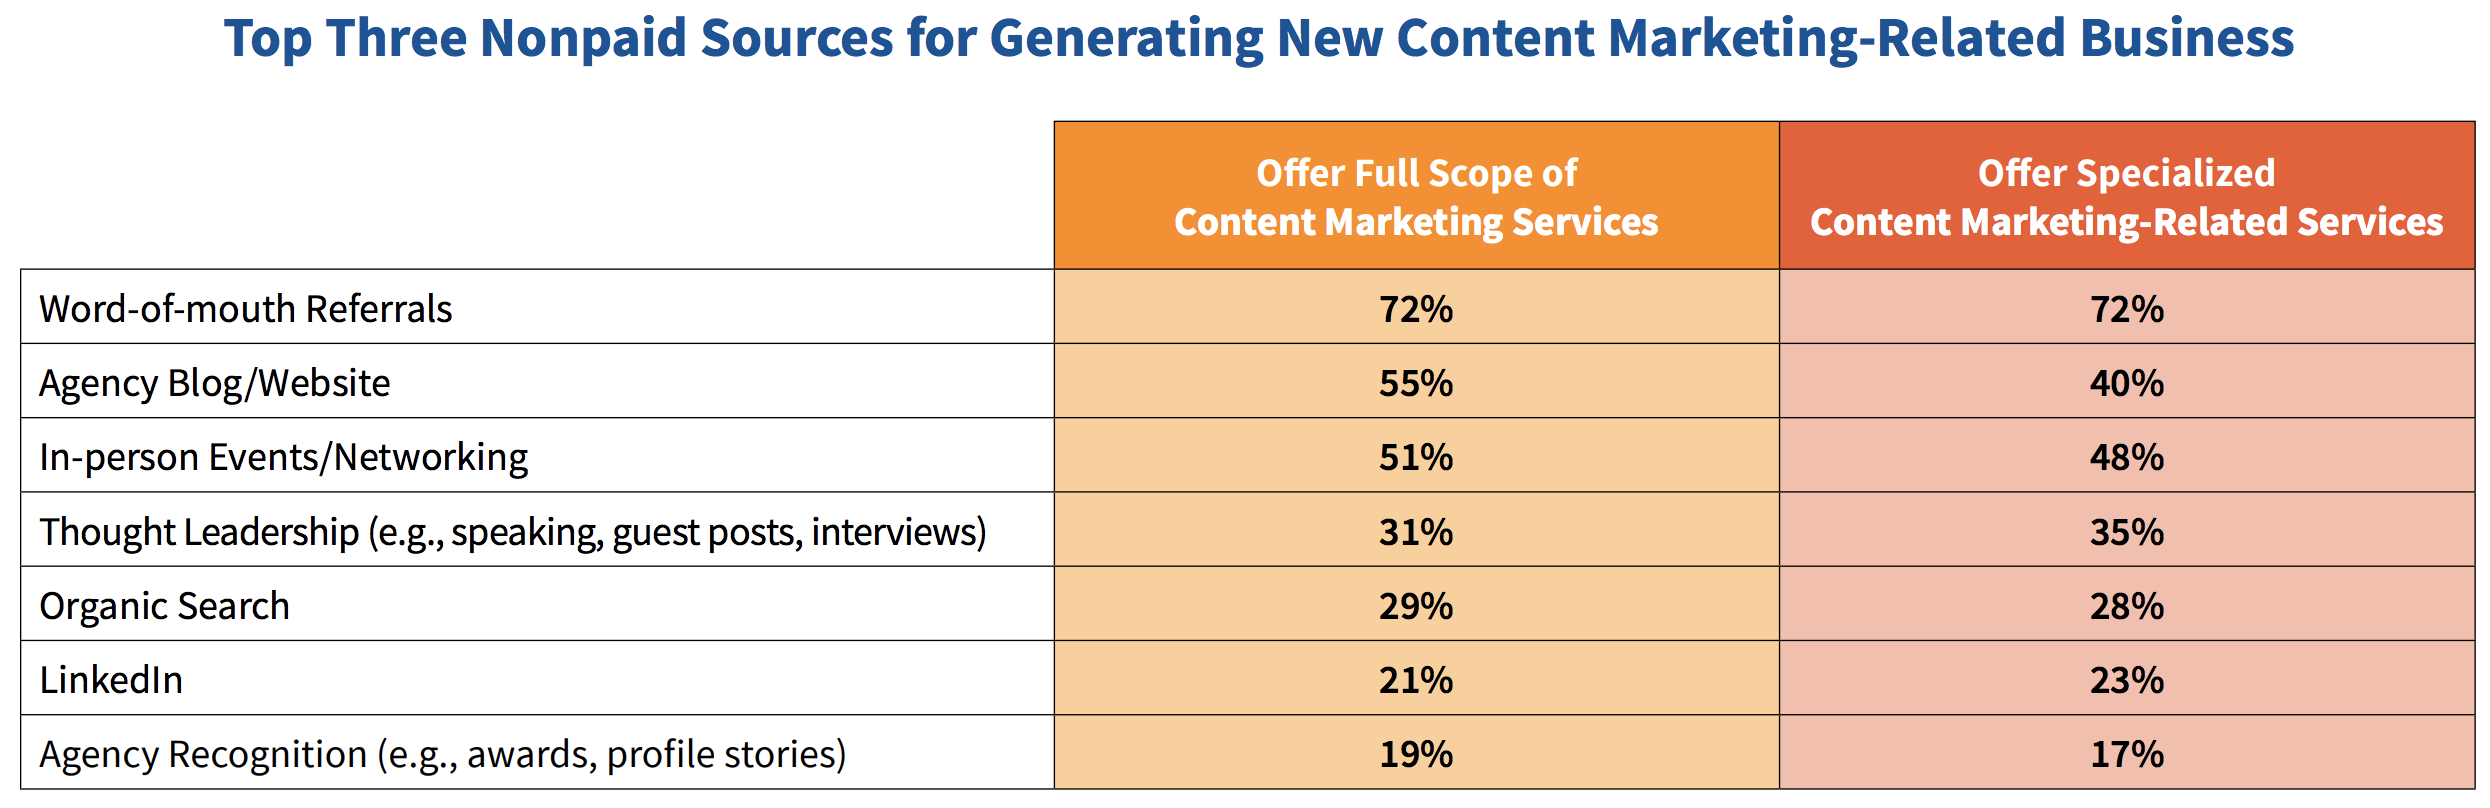 content that generates new business for agencies